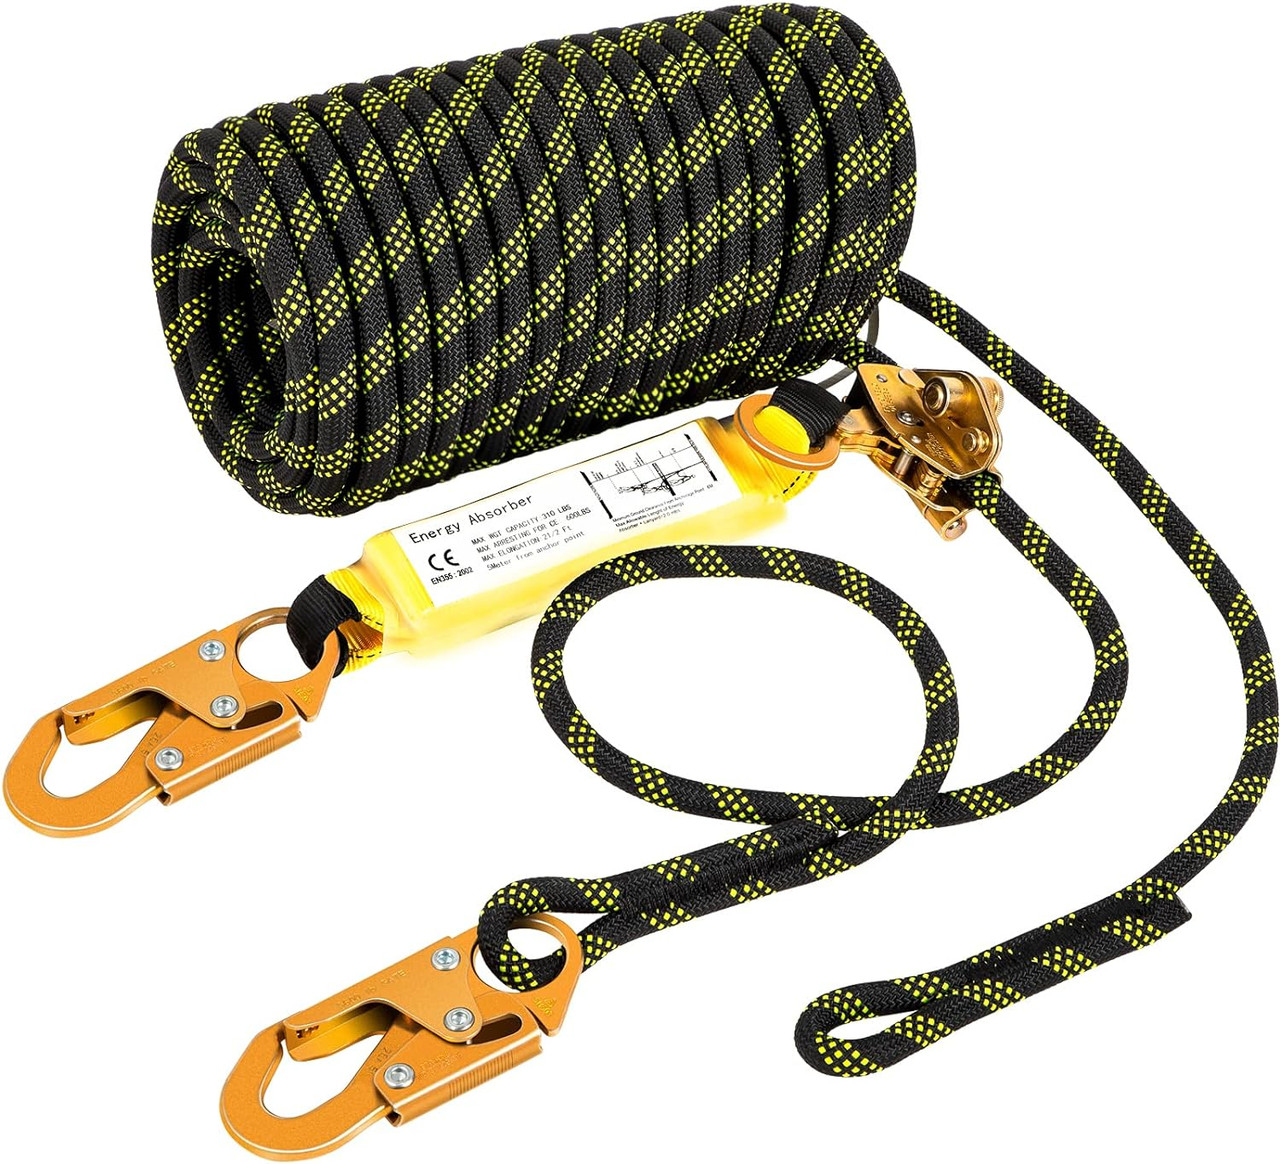 Vertical Lifeline Assembly, 150 ft Fall Protection Rope, Polyester Roofing Rope, CE Compliant Fall Arrest Protection Equipment with Alloy Steel Rope Grab, Two Snap Hooks, Shock Absorber